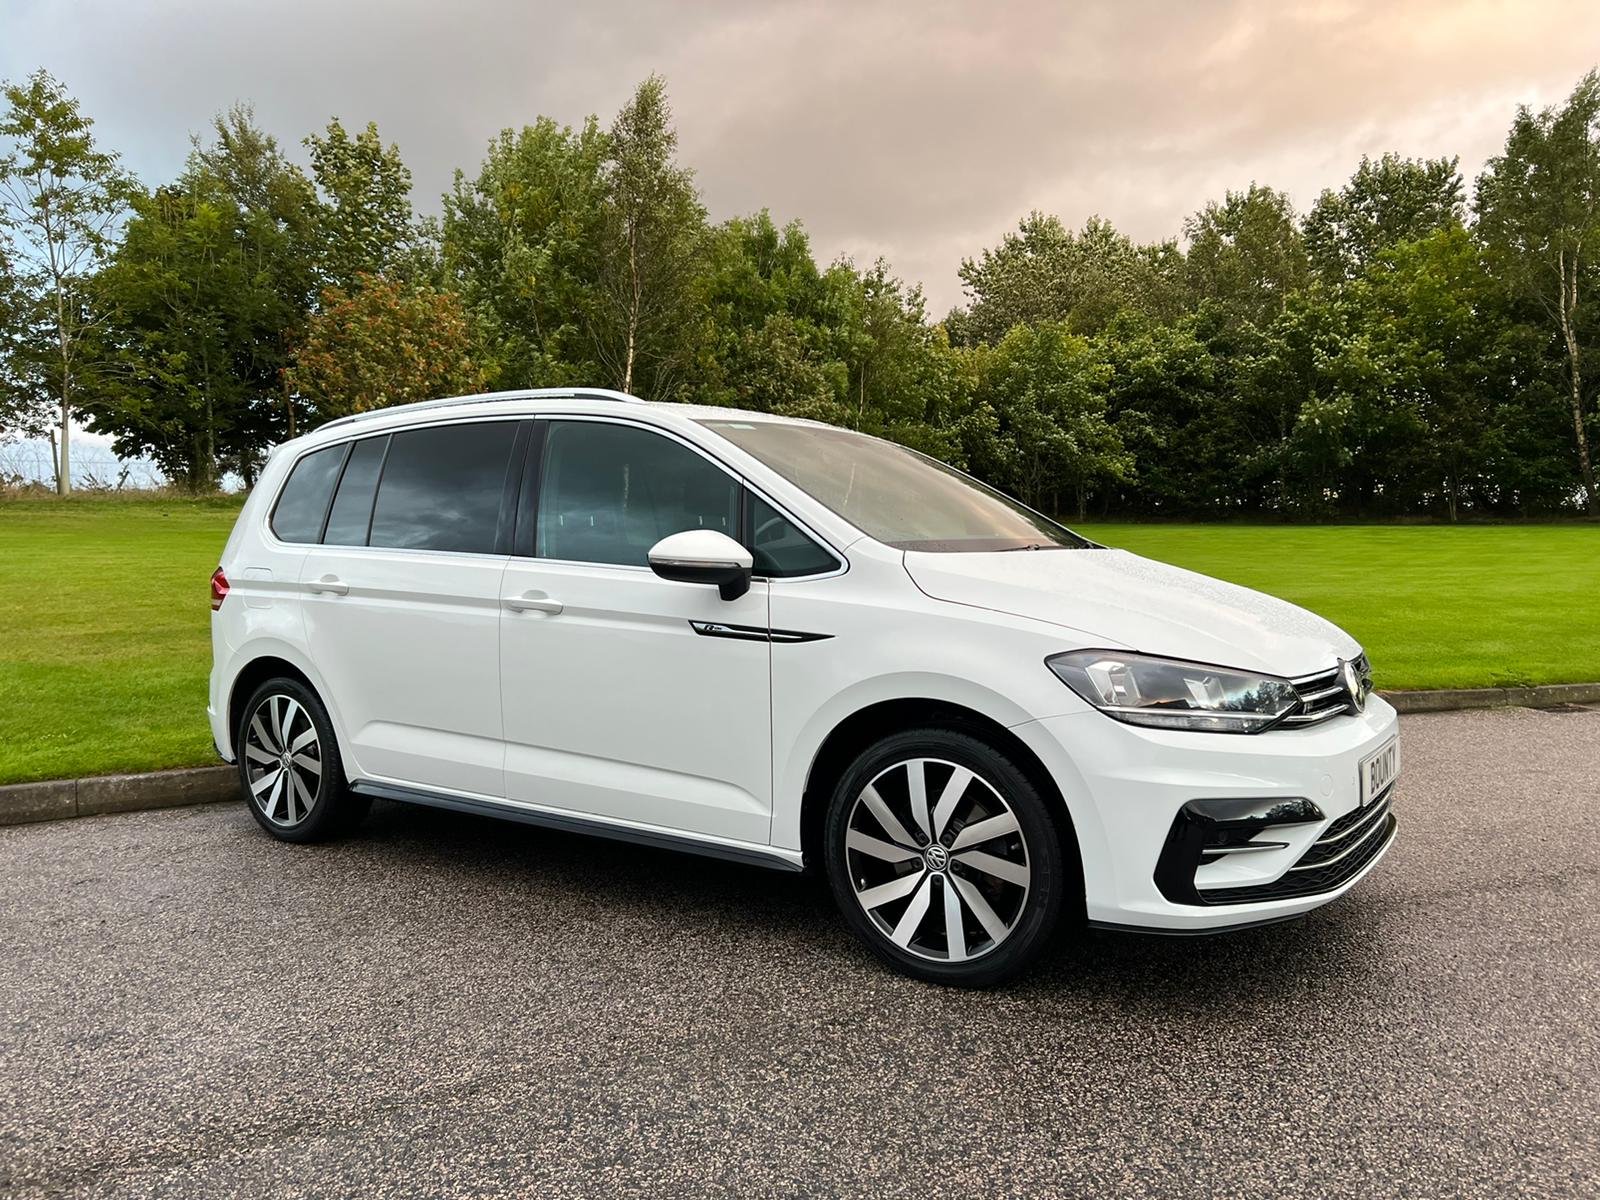 VW says new Touran is lighter, roomier, more frugal